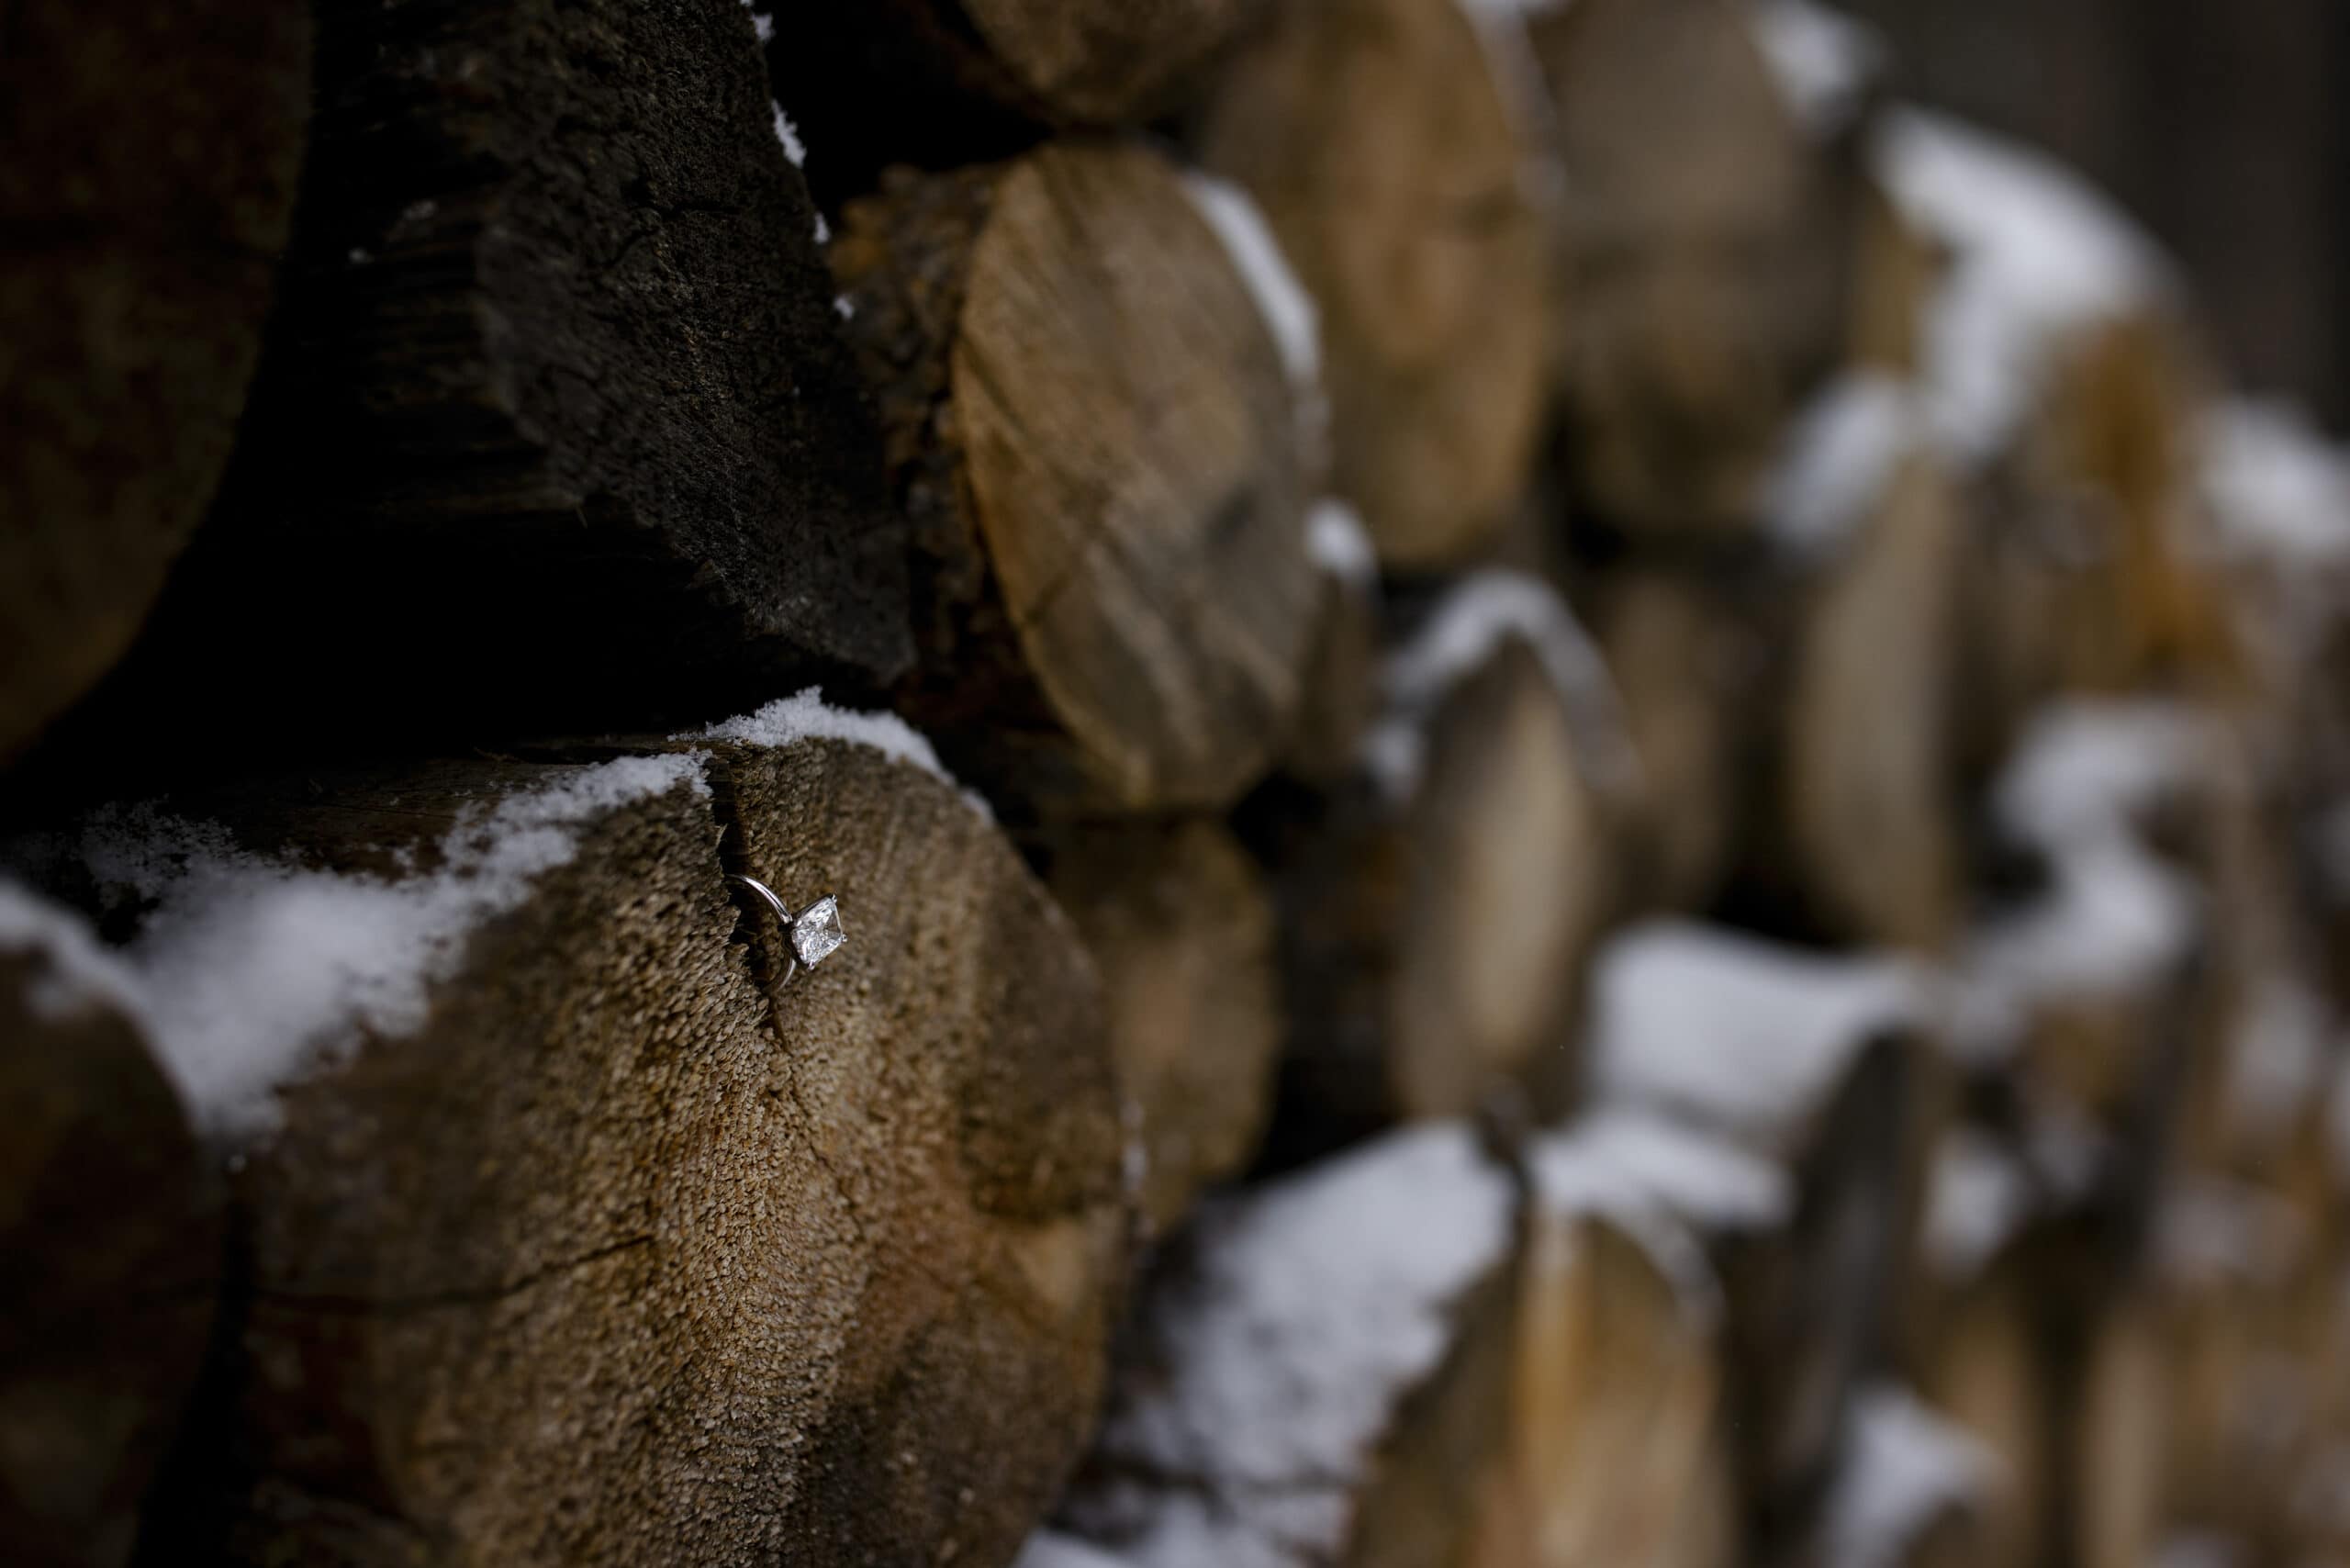 A detail of an engagement ring in a log pile during winter